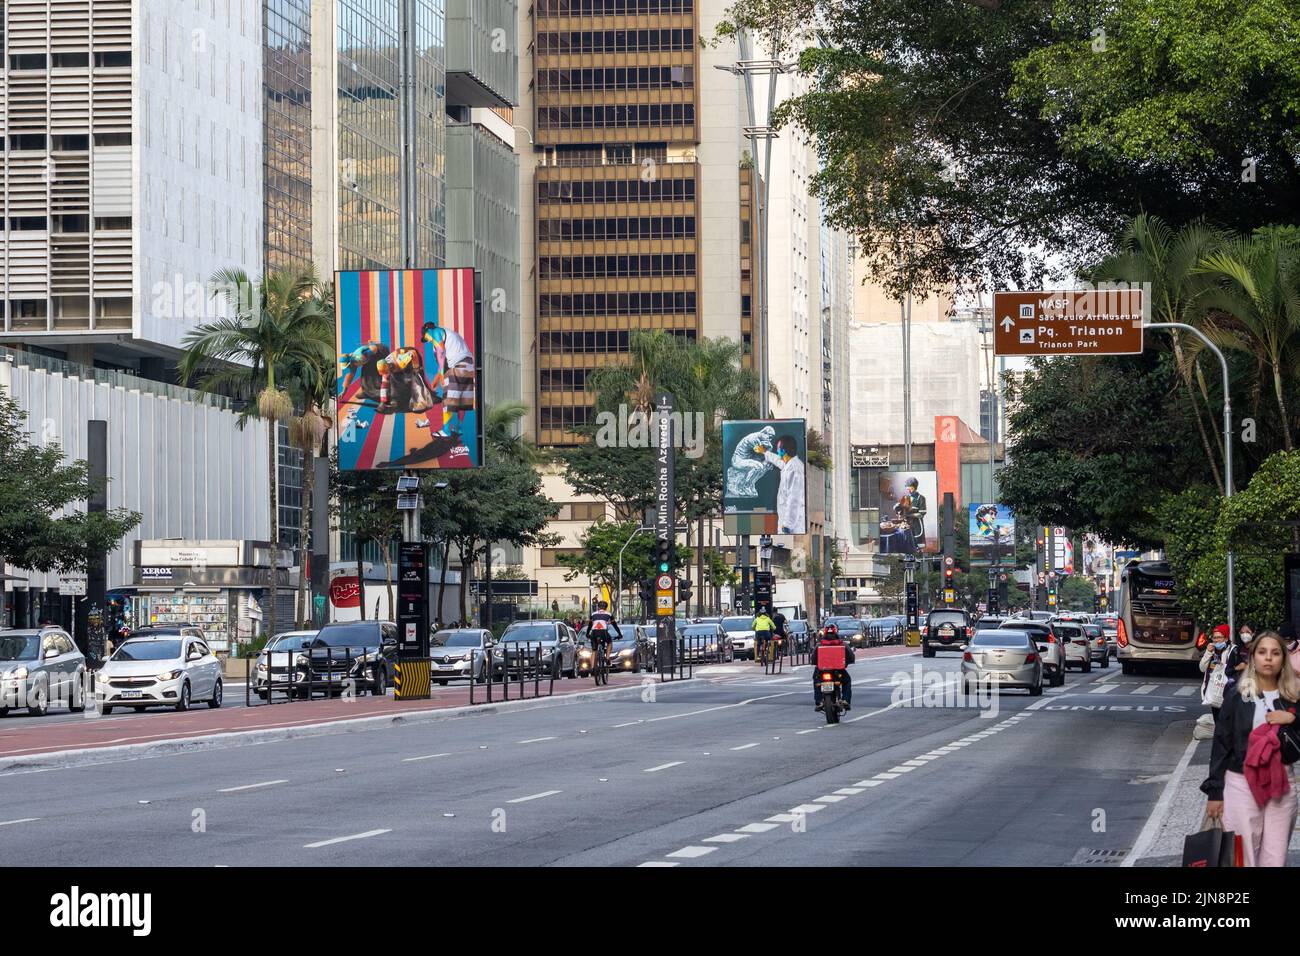 The busy Paulista avenue with traffic, people, billboards, and street signs Stock Photo